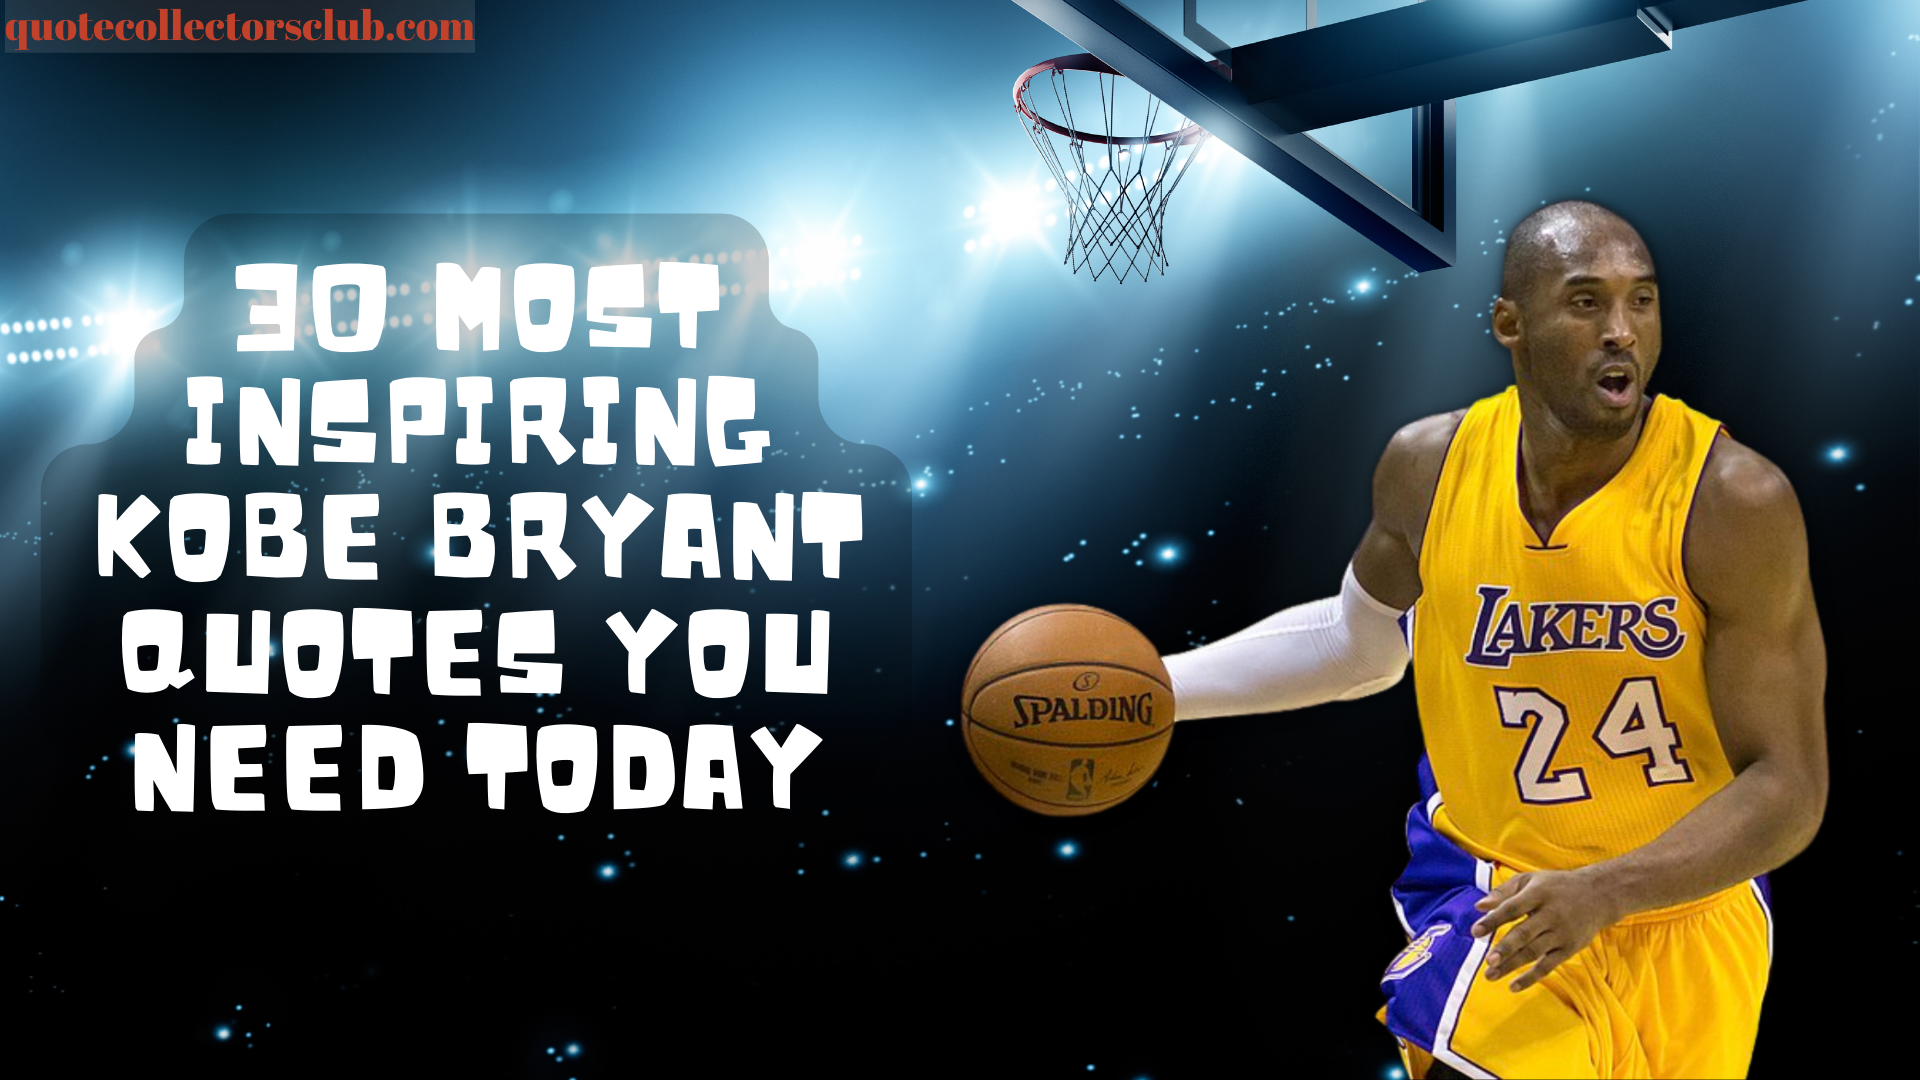 What is Kobe's most famous quote?